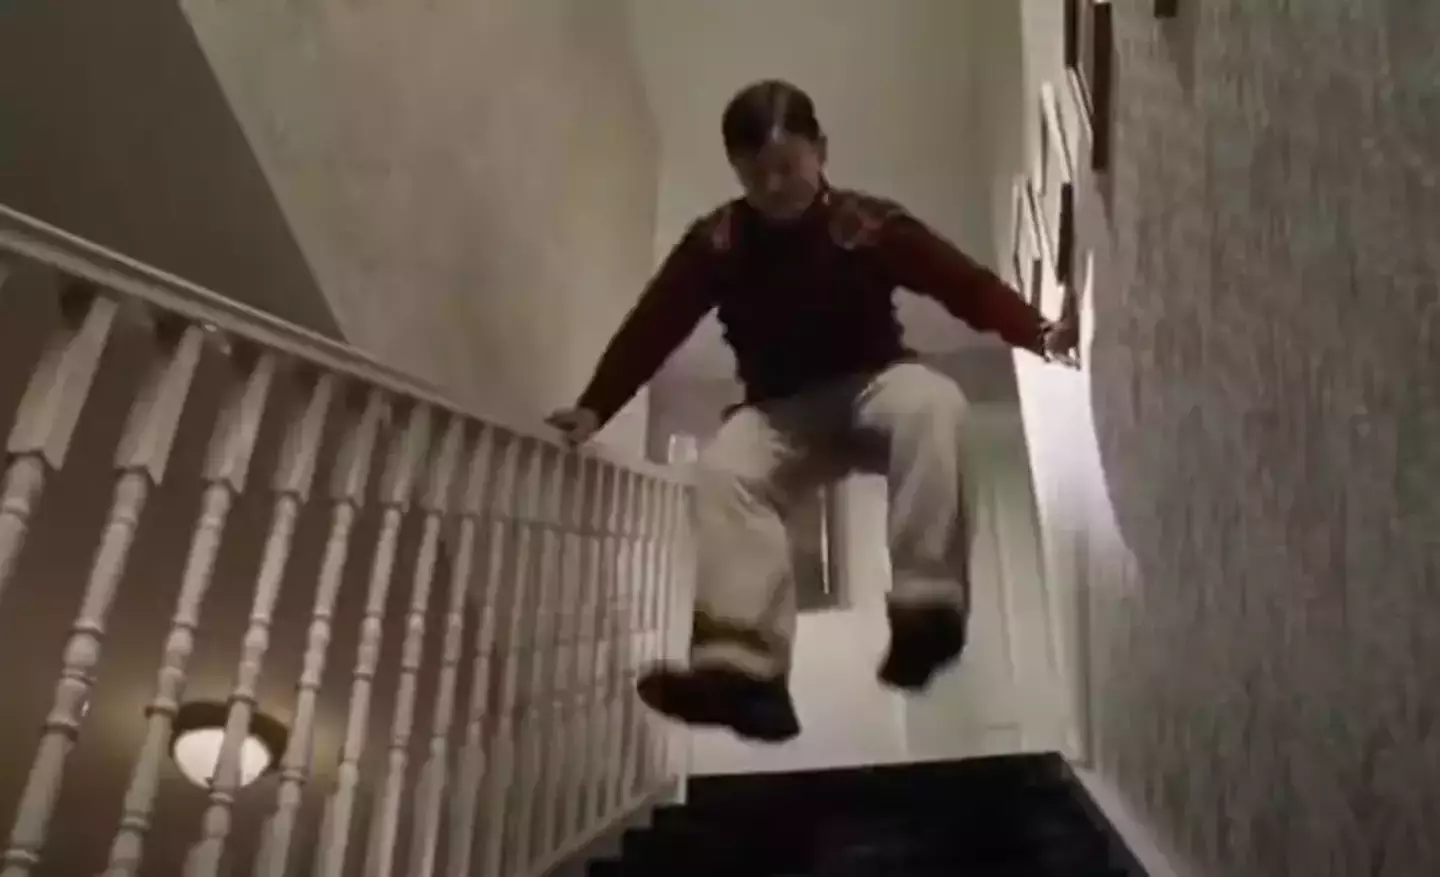 Admit it, you wanted him to fall down the stairs here didn't you? (Warner Bros.)